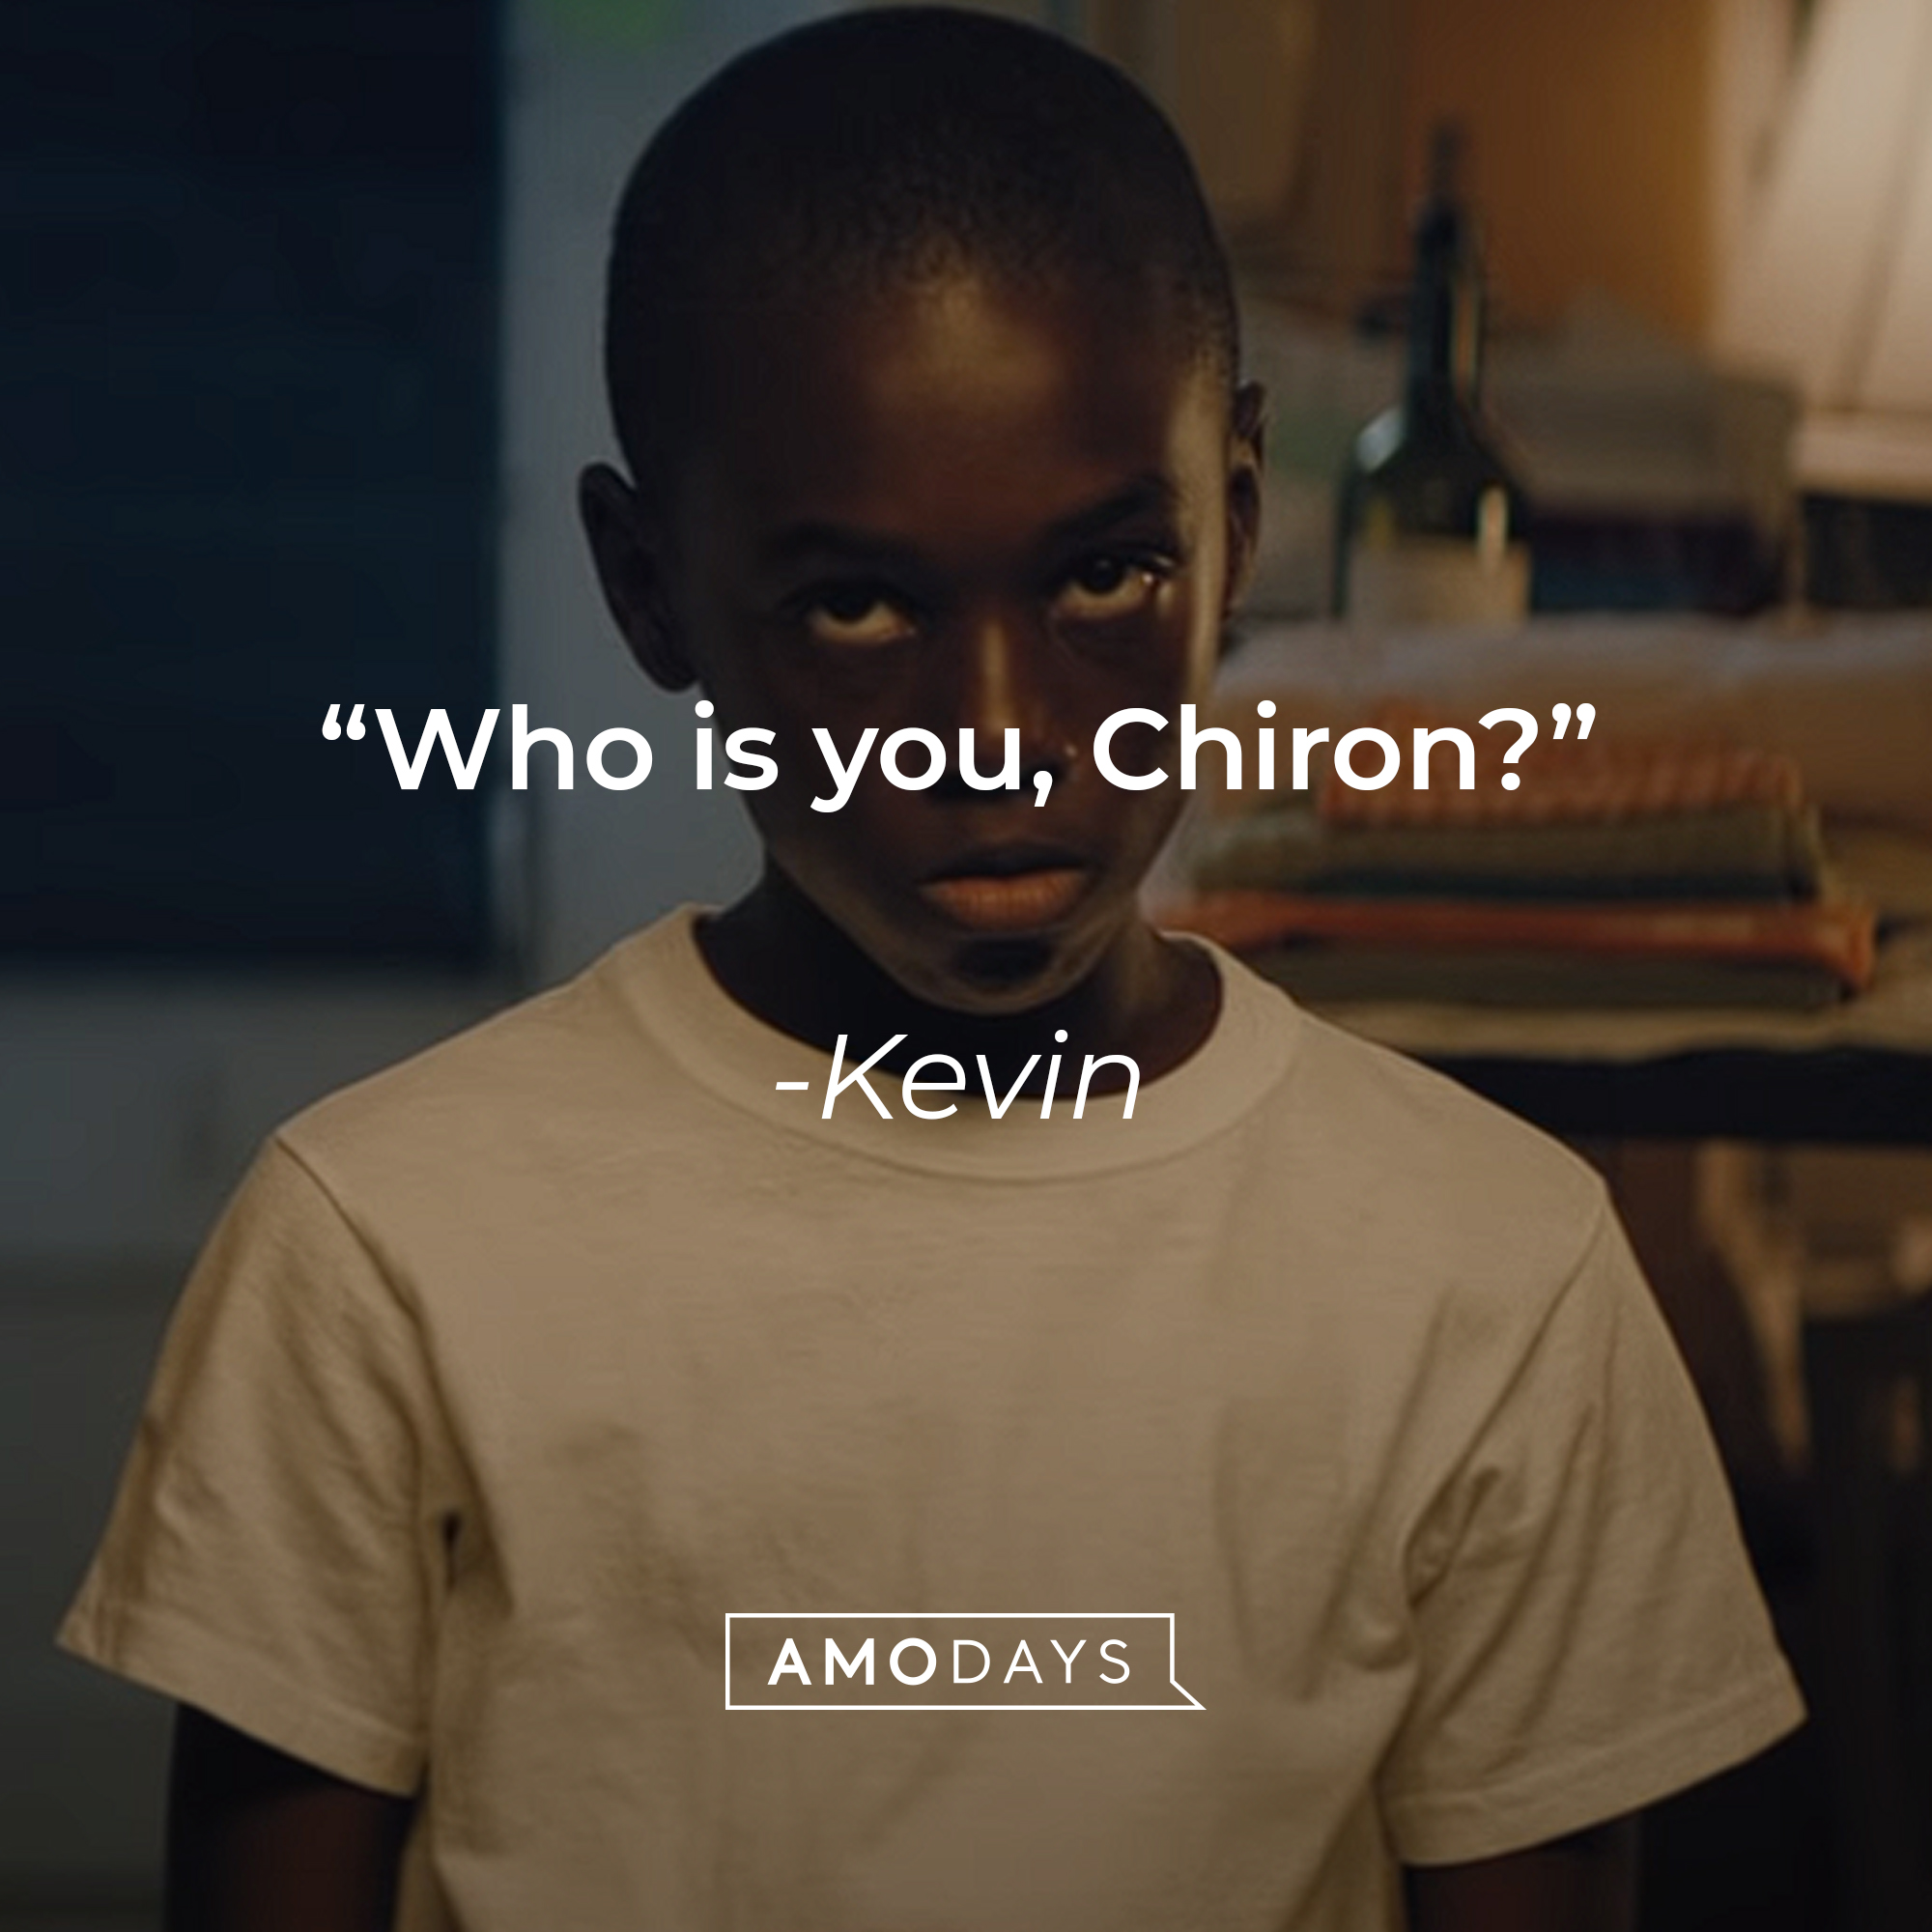 An image of Chiron with Kevin’s quote: “Who is you, Chiron?” | Source: youtube.com/A24